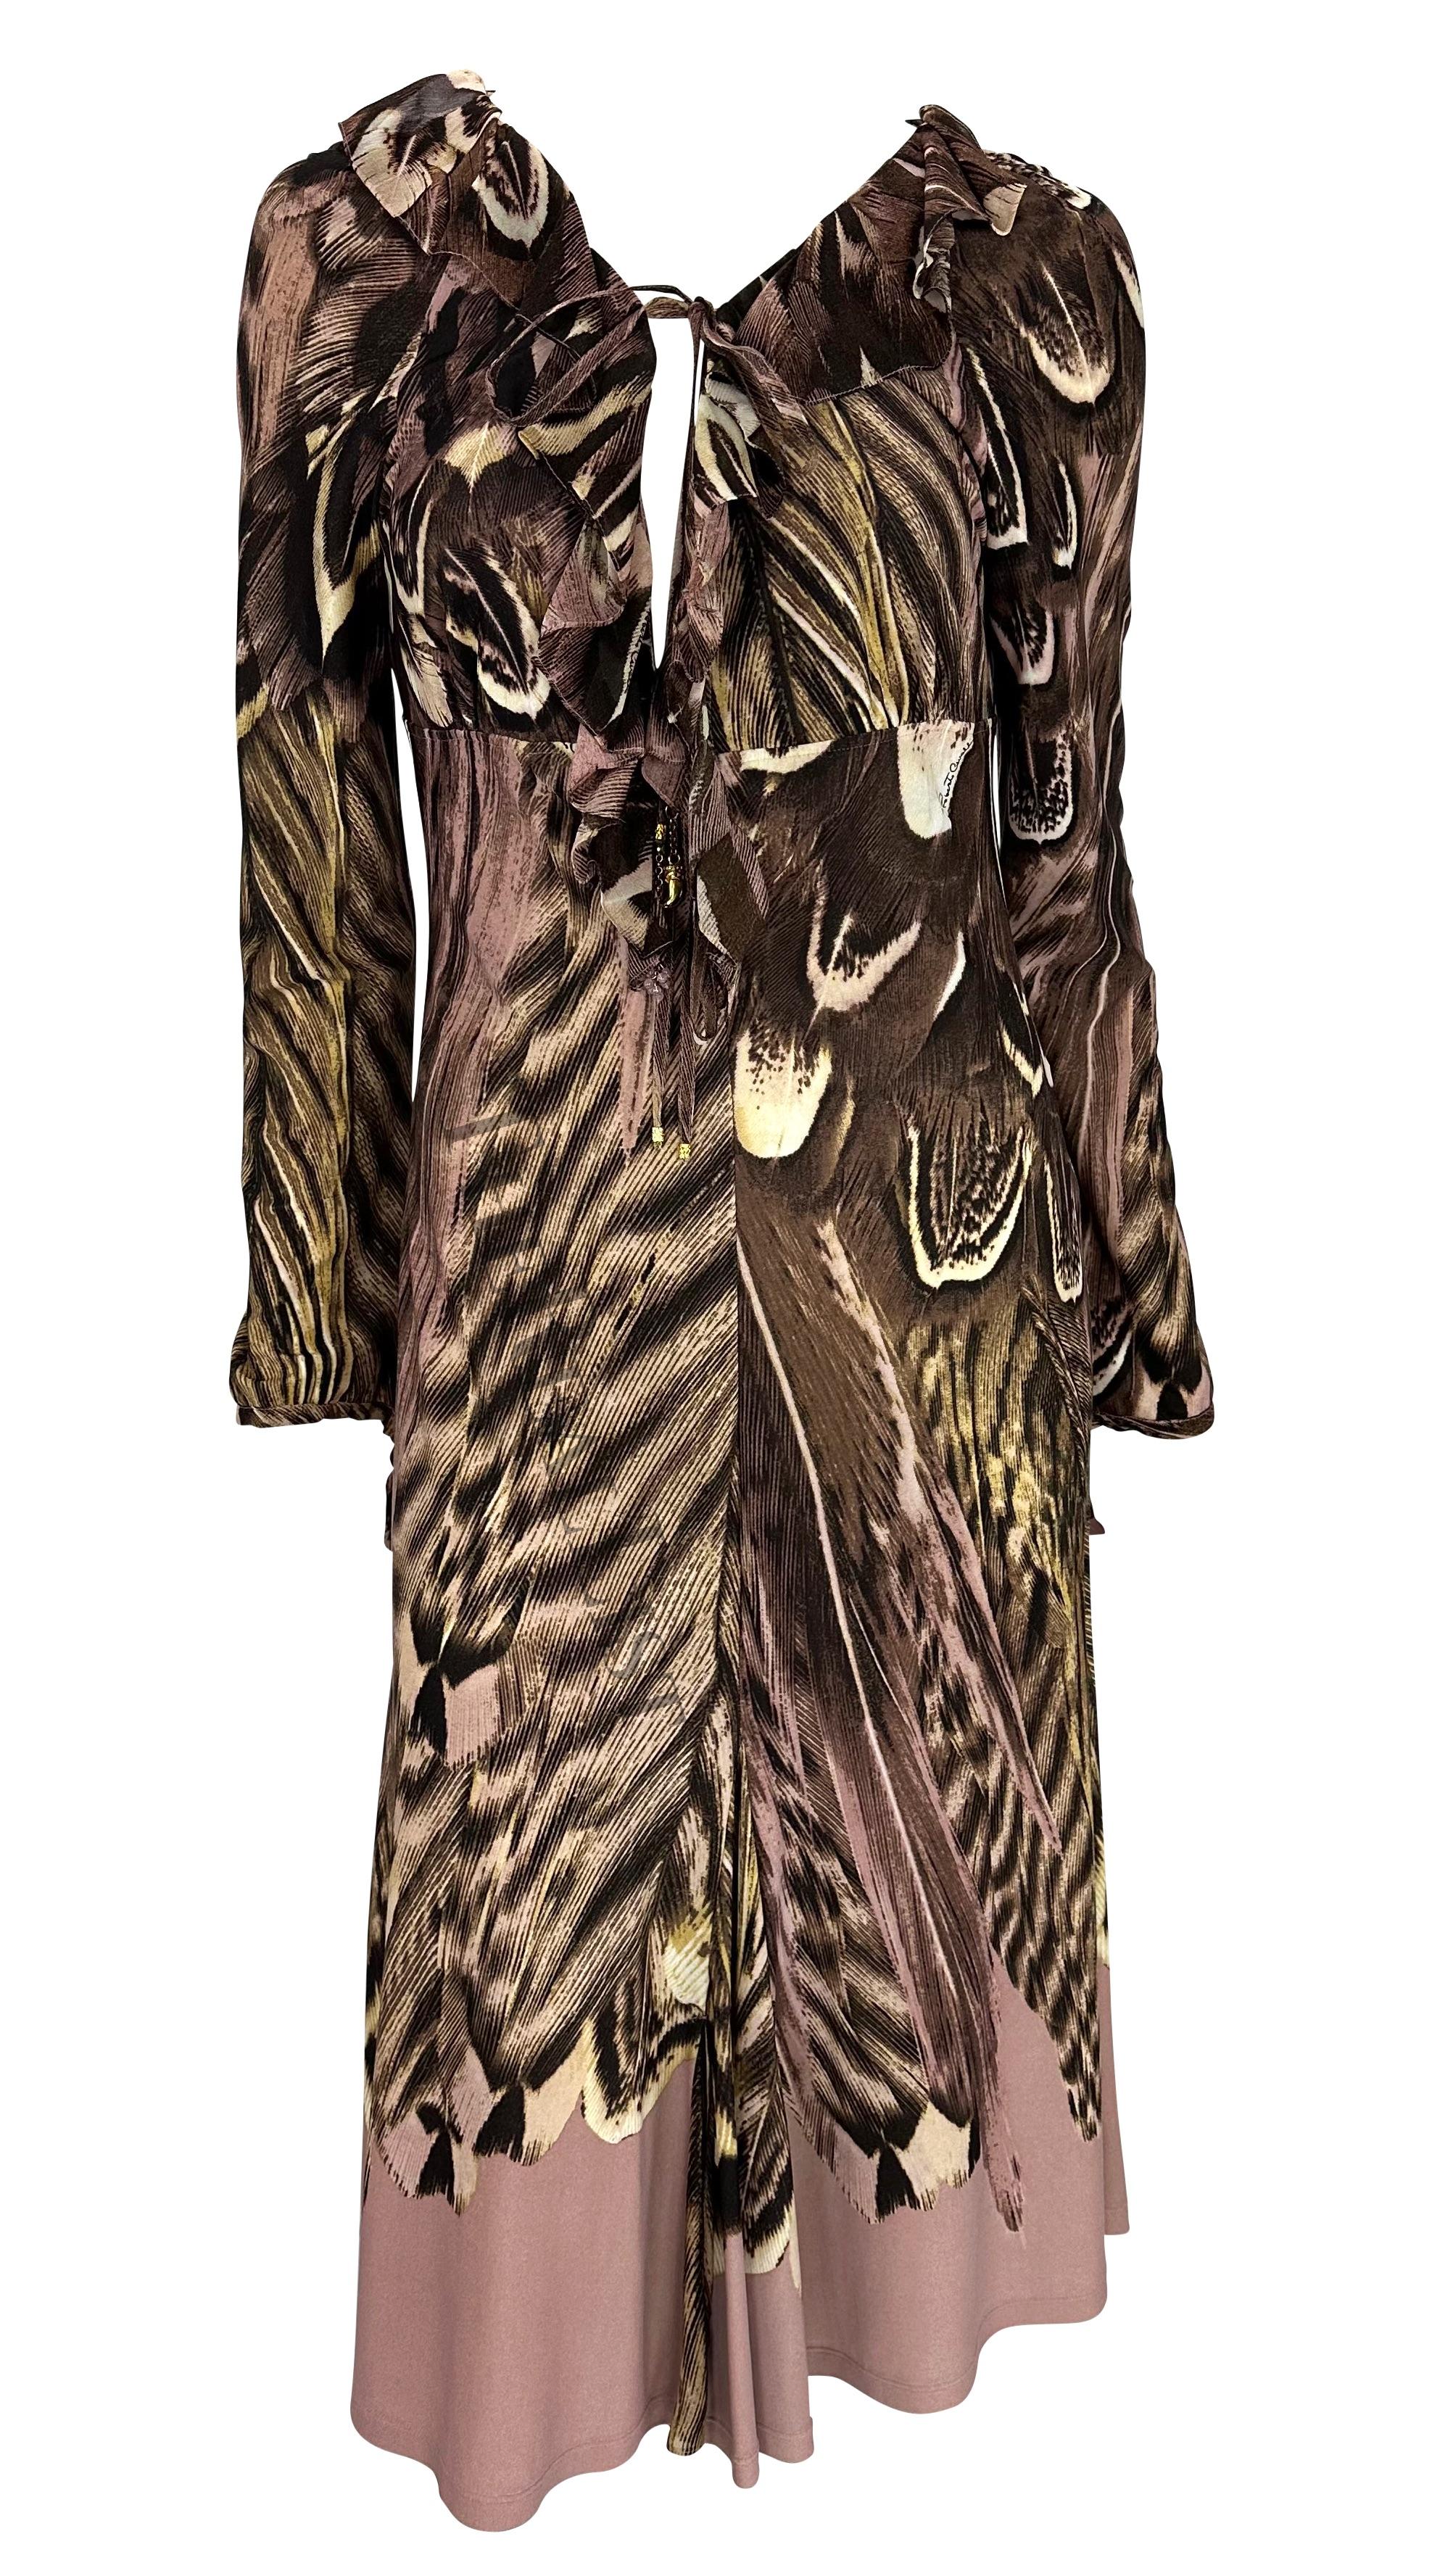 Women's S/S 2005 Roberto Cavalli Pink Feather Print Long Sleeve Charm Dress For Sale